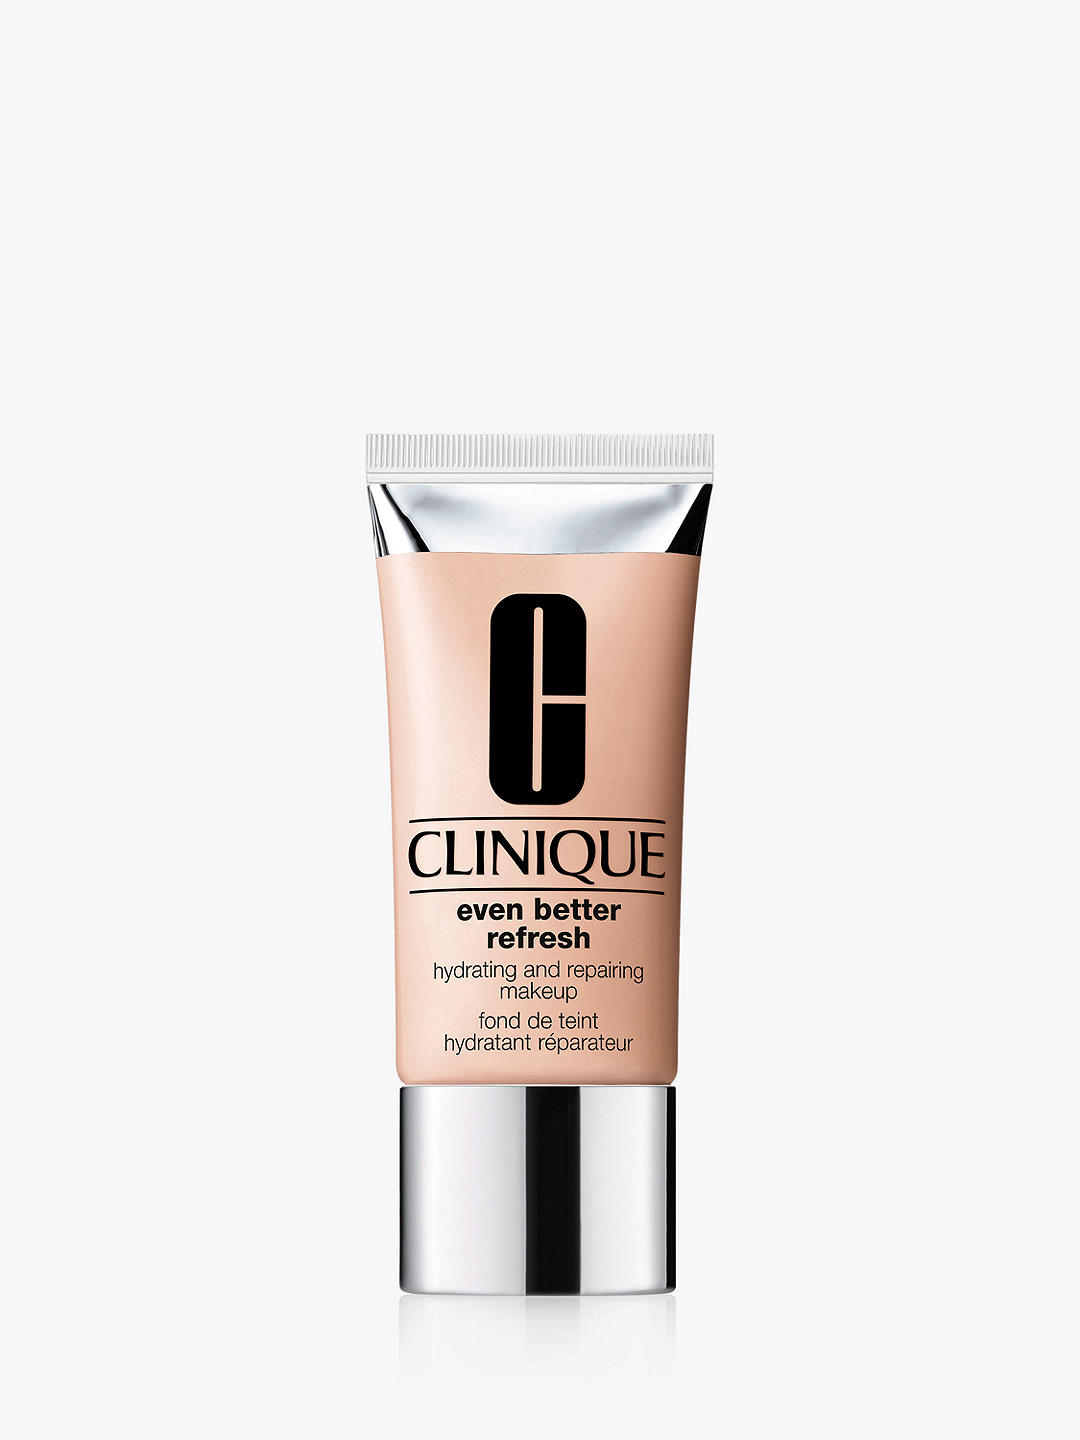 Clinique Even Better Refresh Hydrating & Repairing Makeup, CN 29 Bisque 1